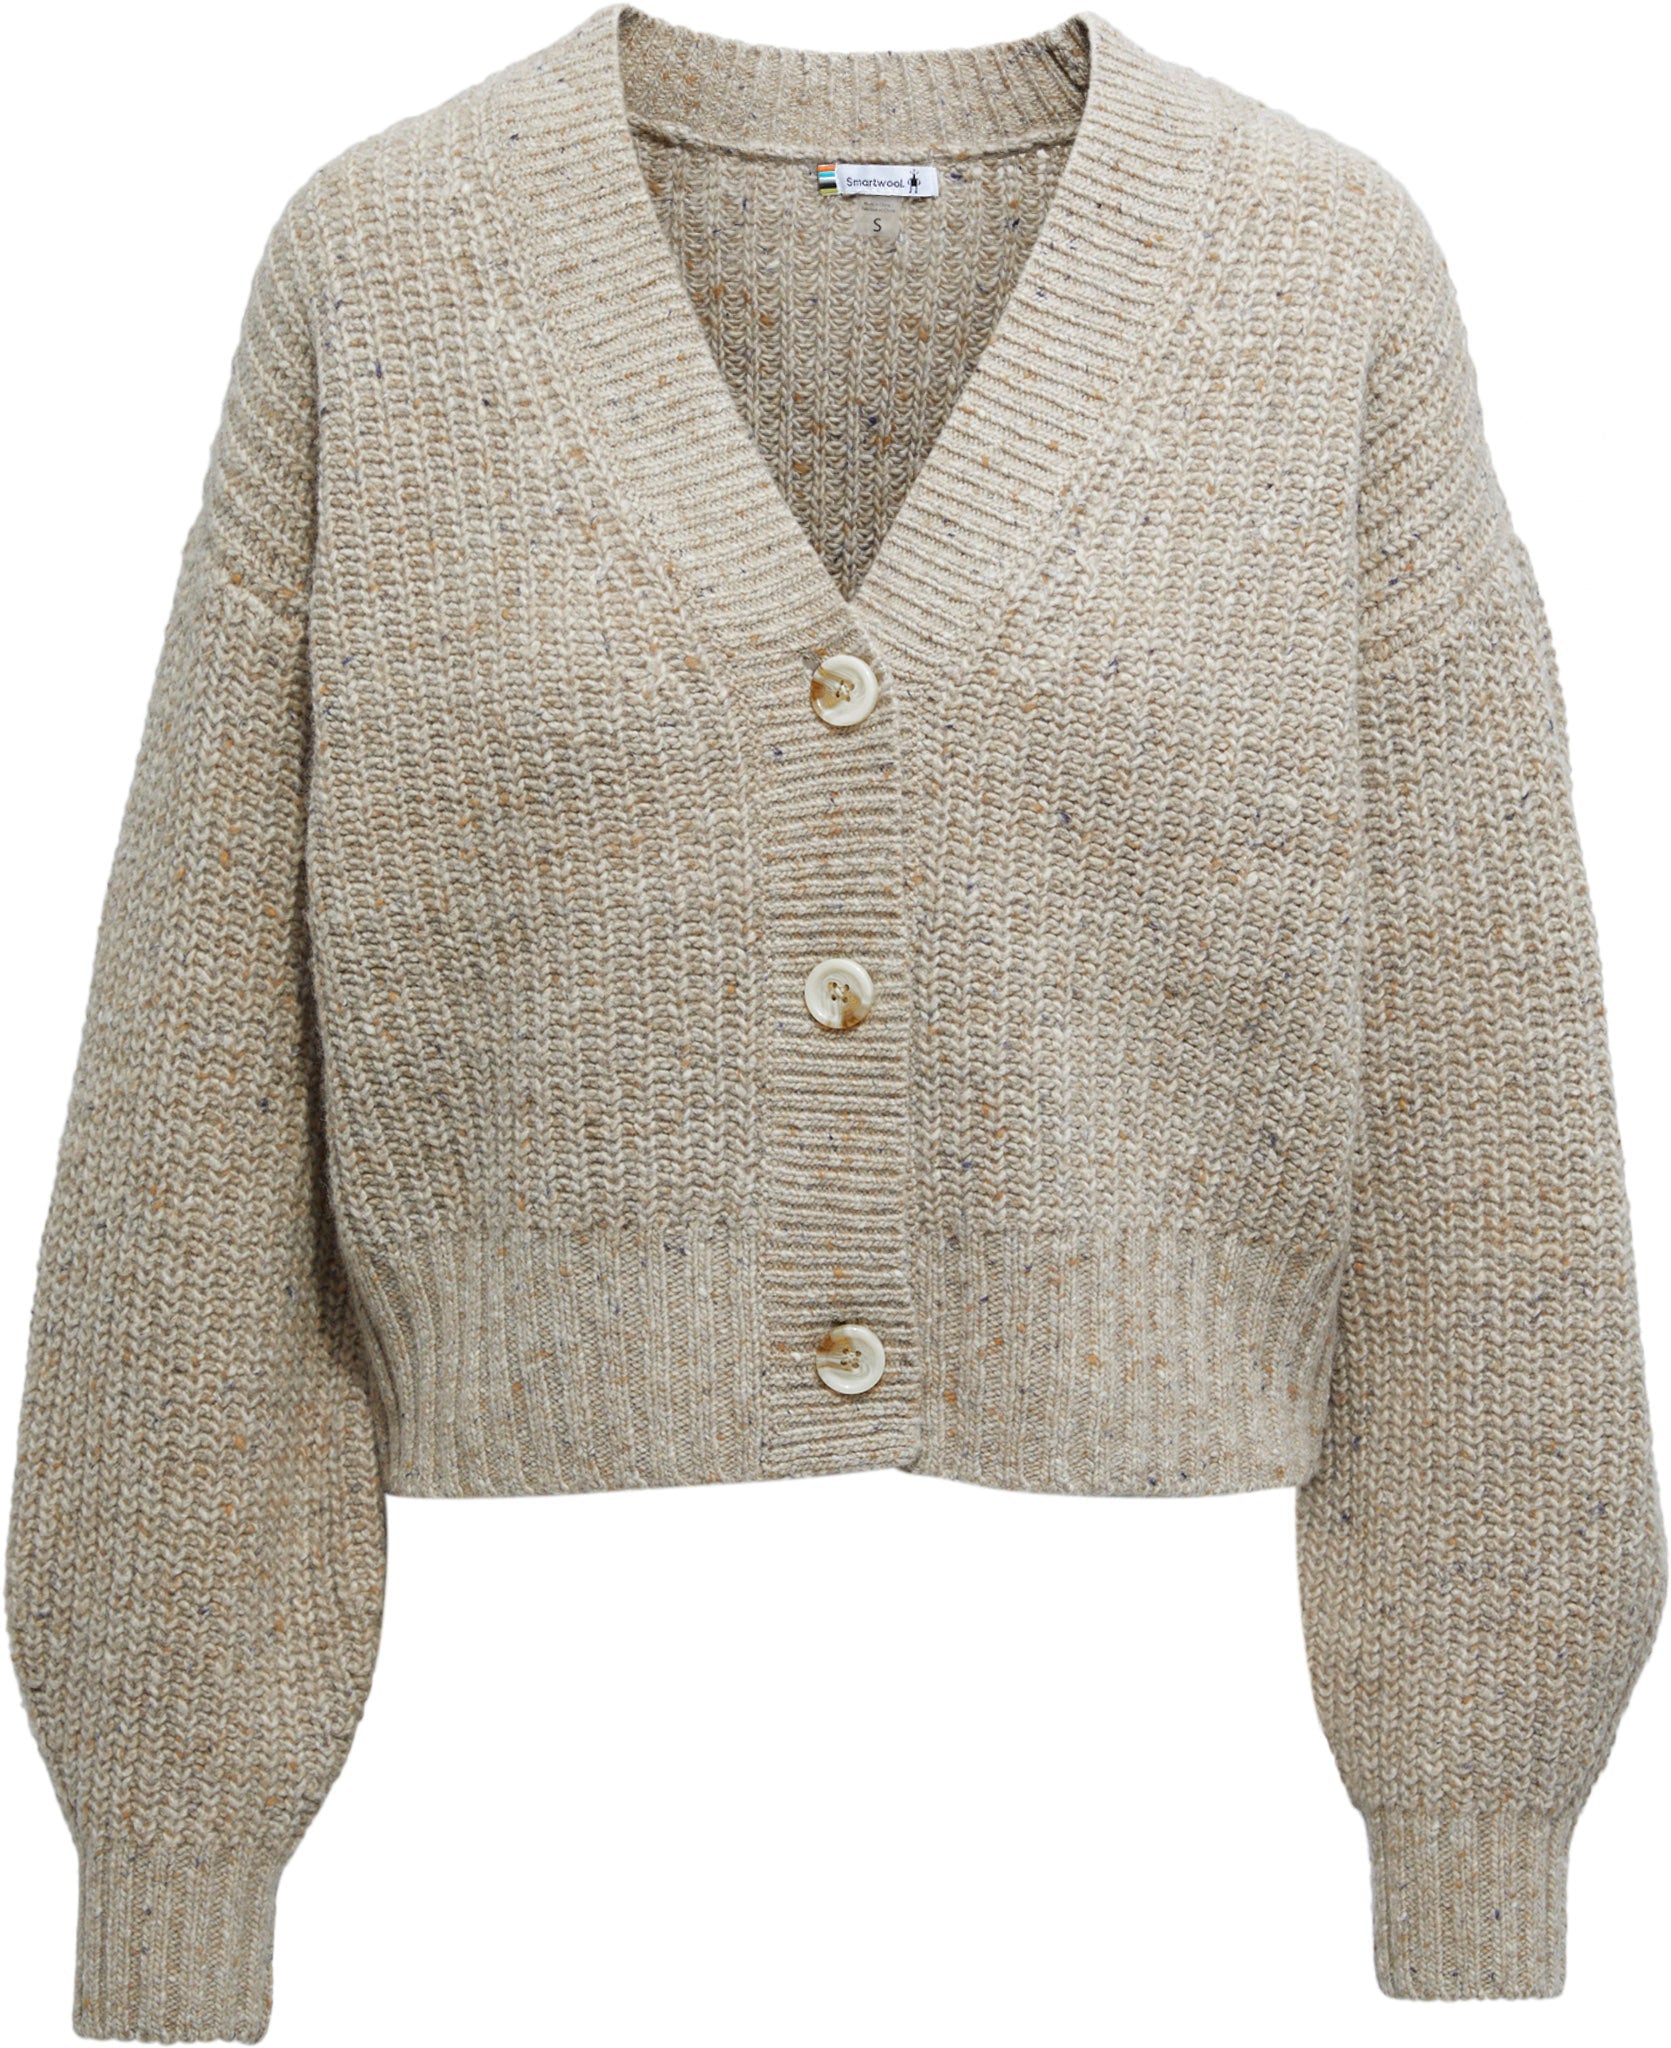 Smartwool Cozy Lodge Cropped Cardigan Sweater - Women’s | Altitude Sports